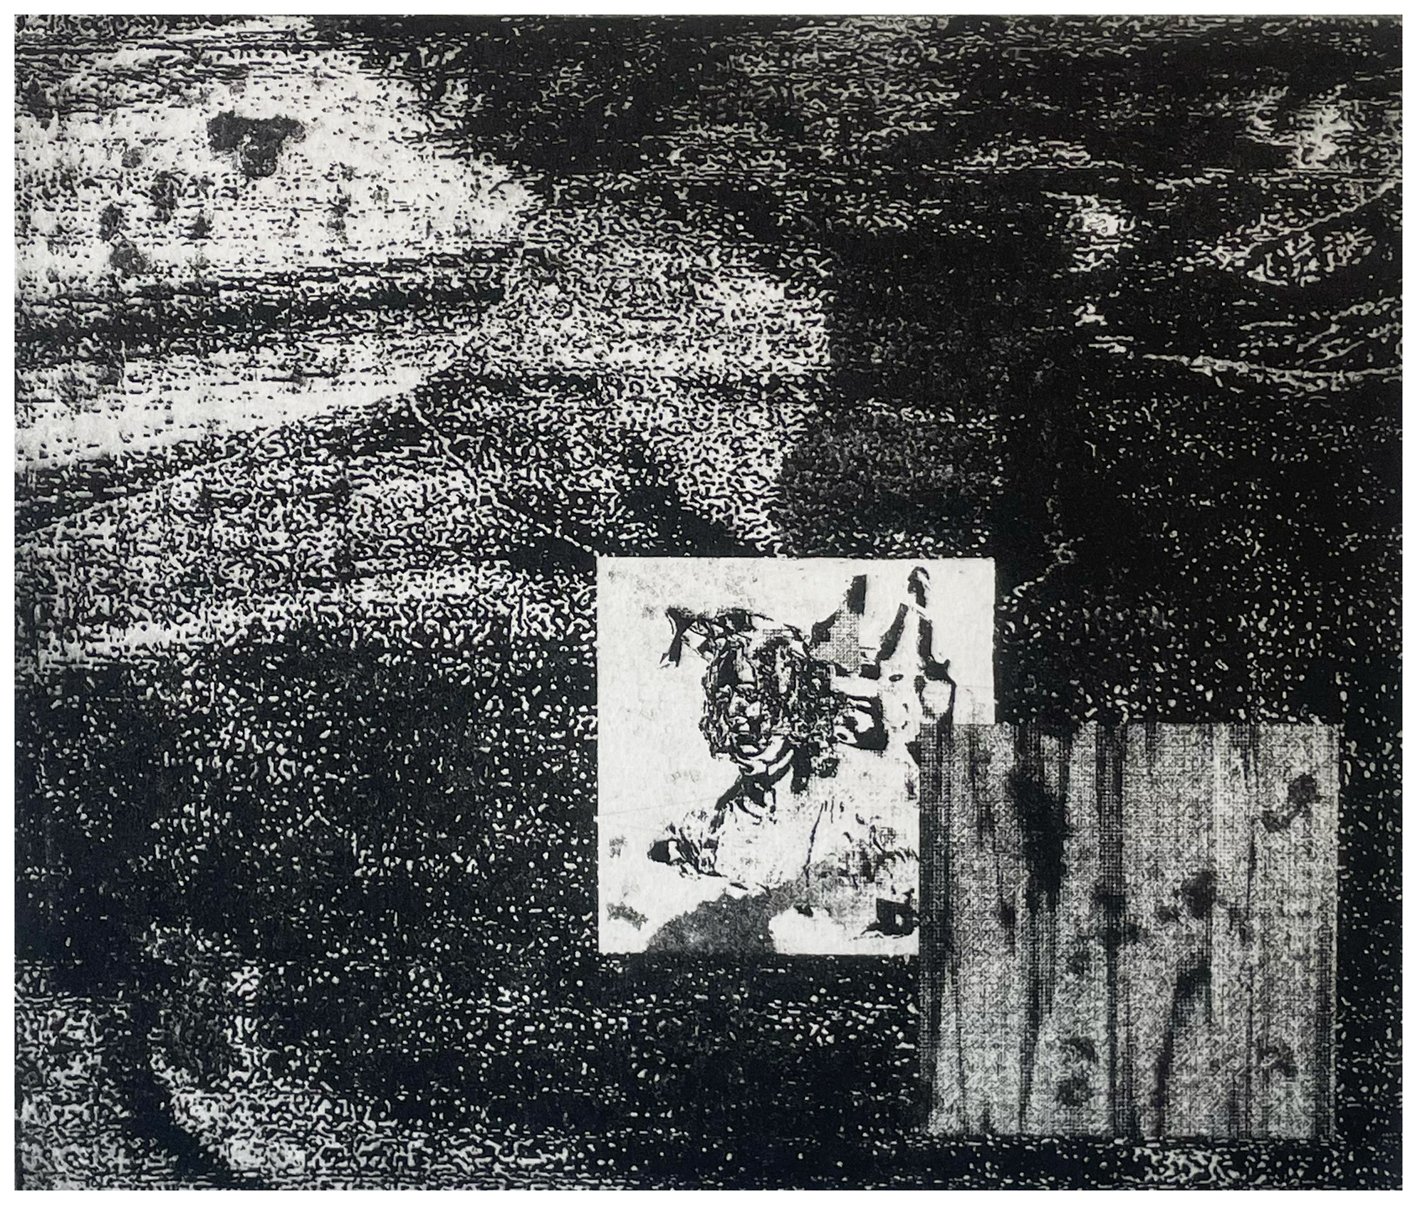  Annabelle McEwen,  Corporeal data composition  2023,  copper plate etching on Hahnemühle, 45 x 50 cm   